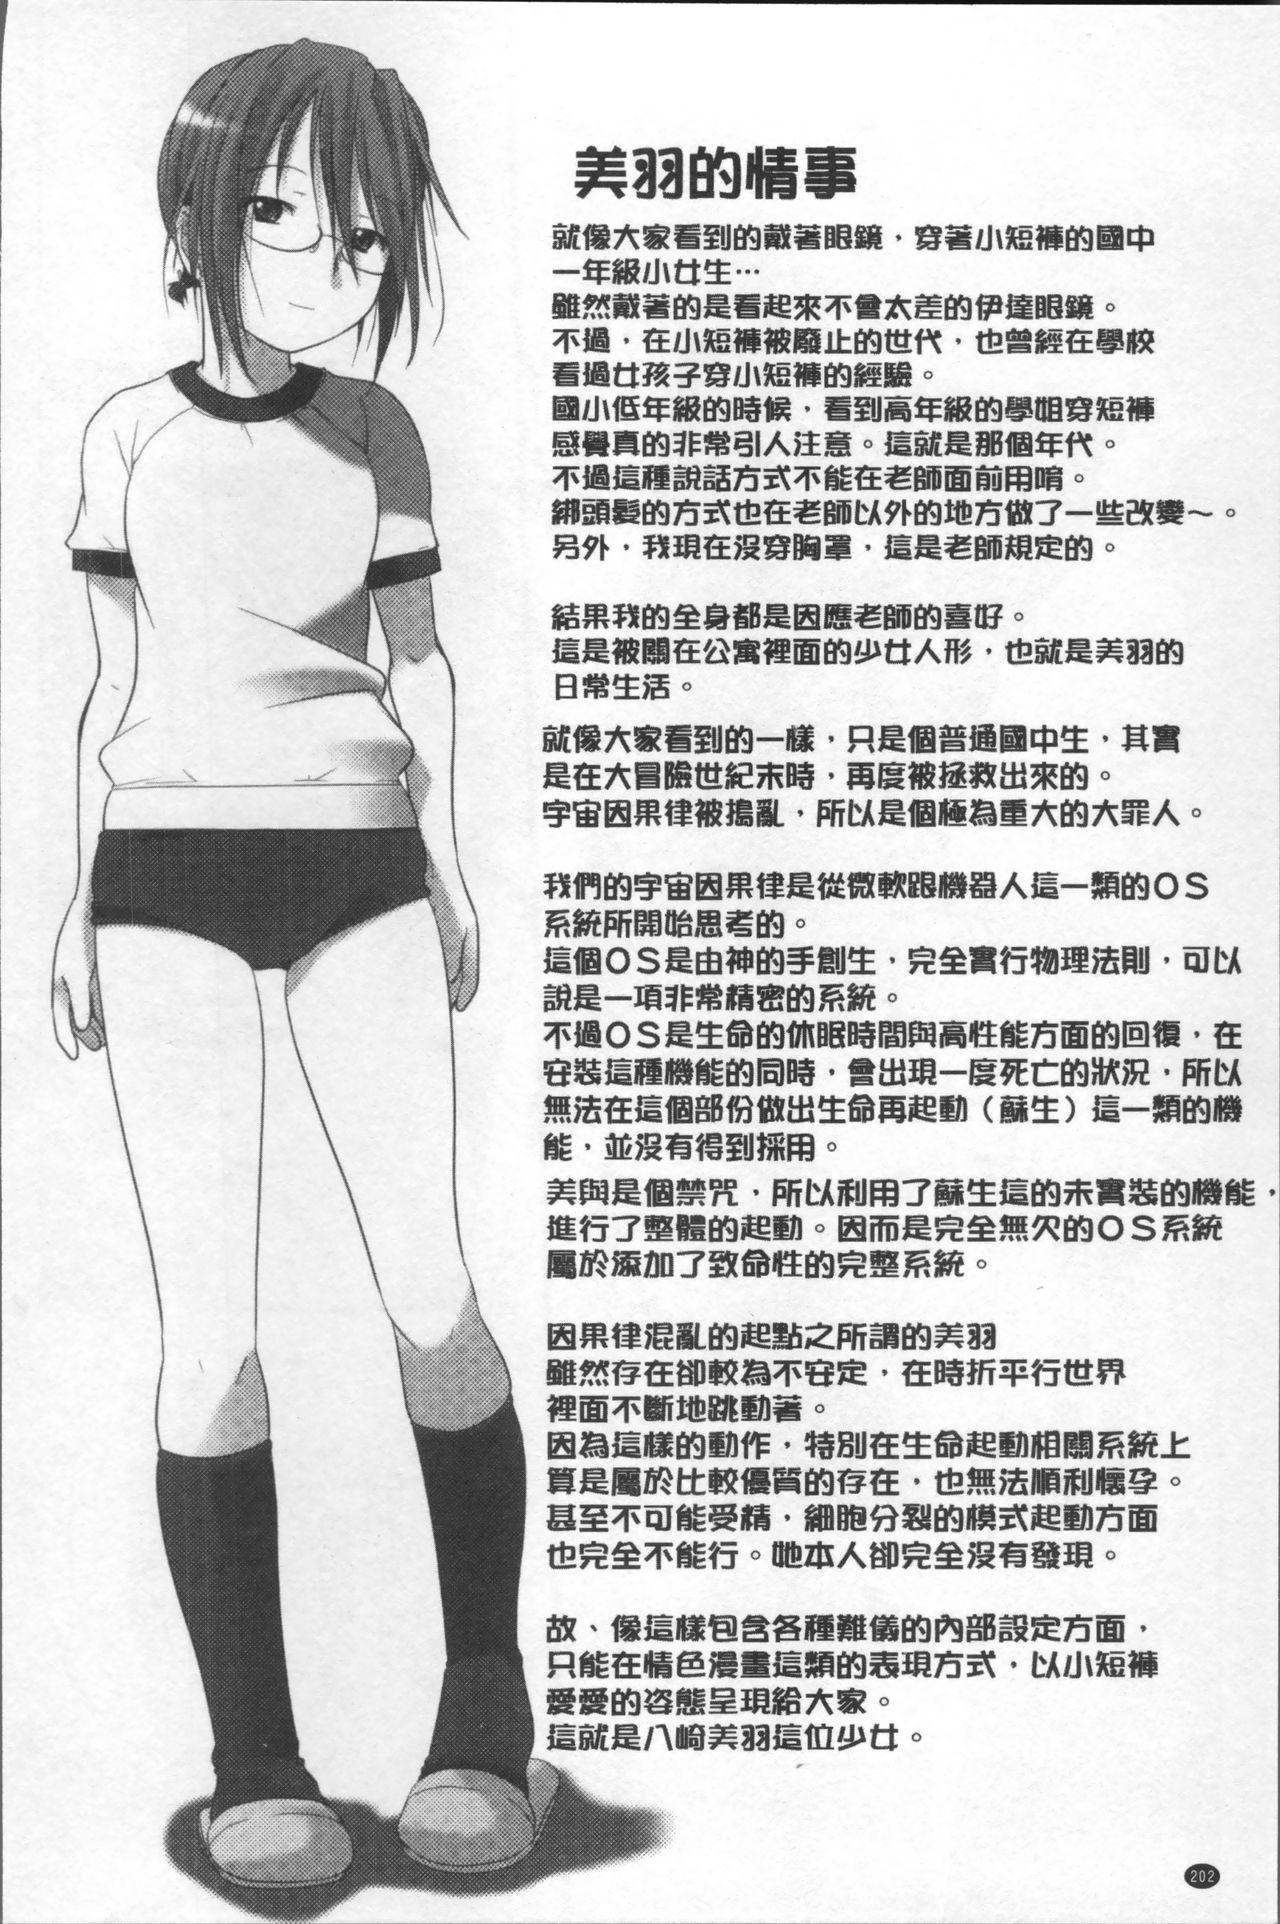 Bloomers to Megane de Inkou!! - Illicit Intercourse with Bloomers & Glasses!! 210